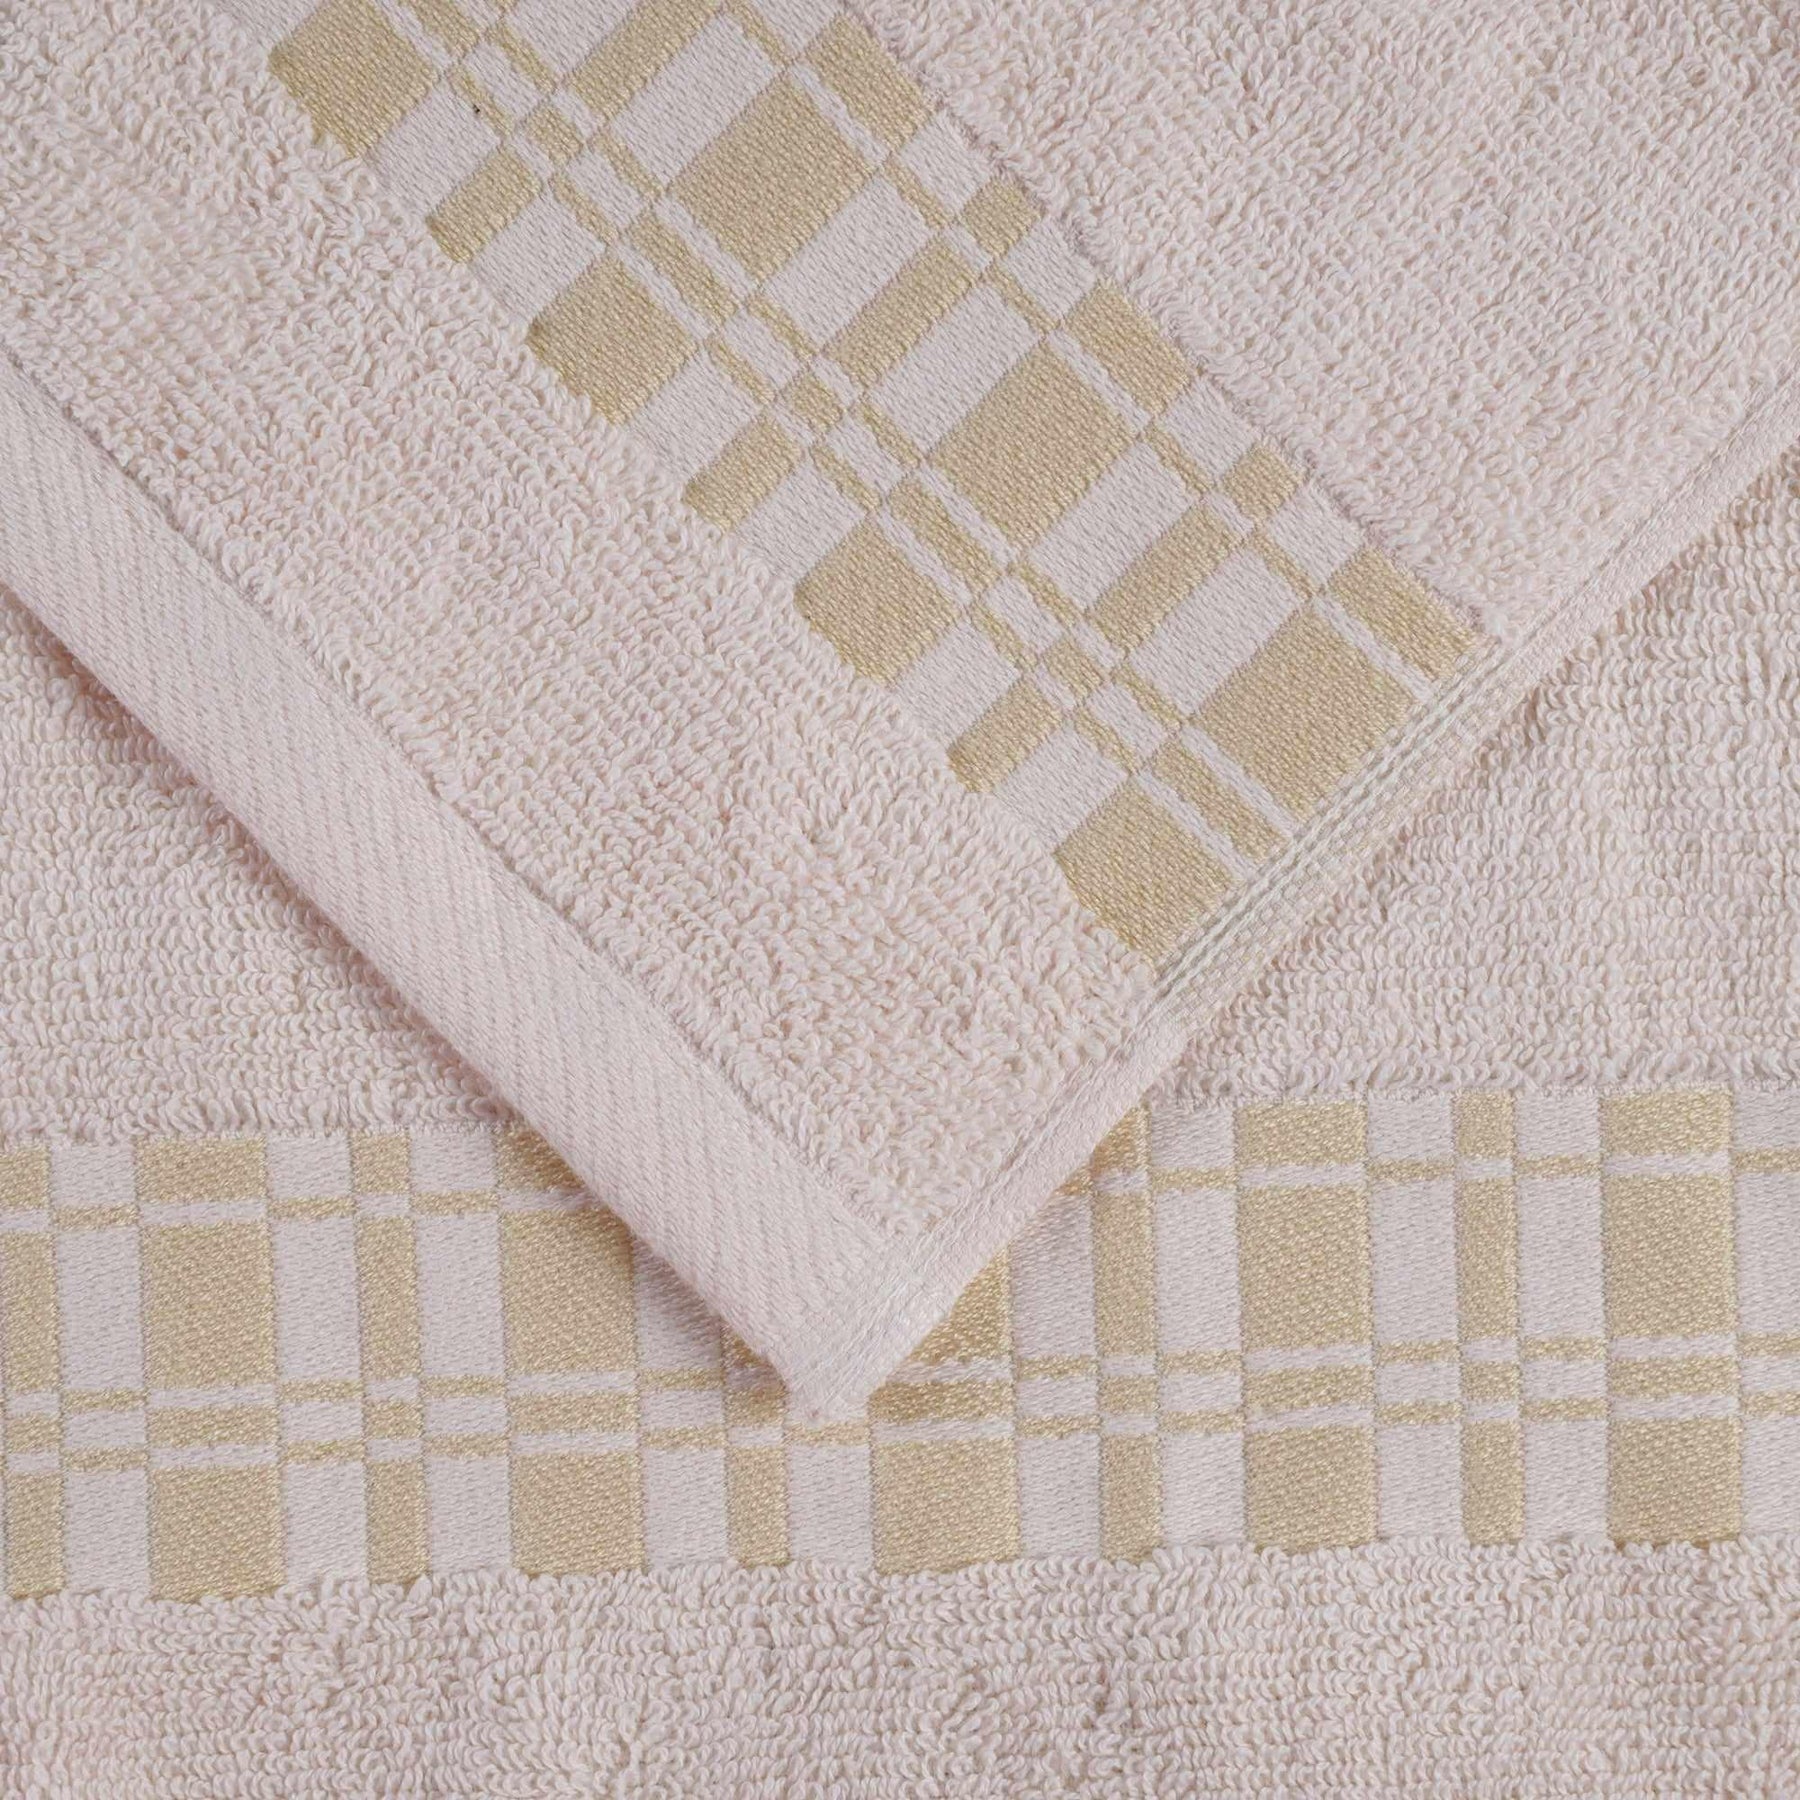  Superior Larissa Cotton 6-Piece Assorted Towel Set with Geometric Embroidered Jacquard Border - Ivory